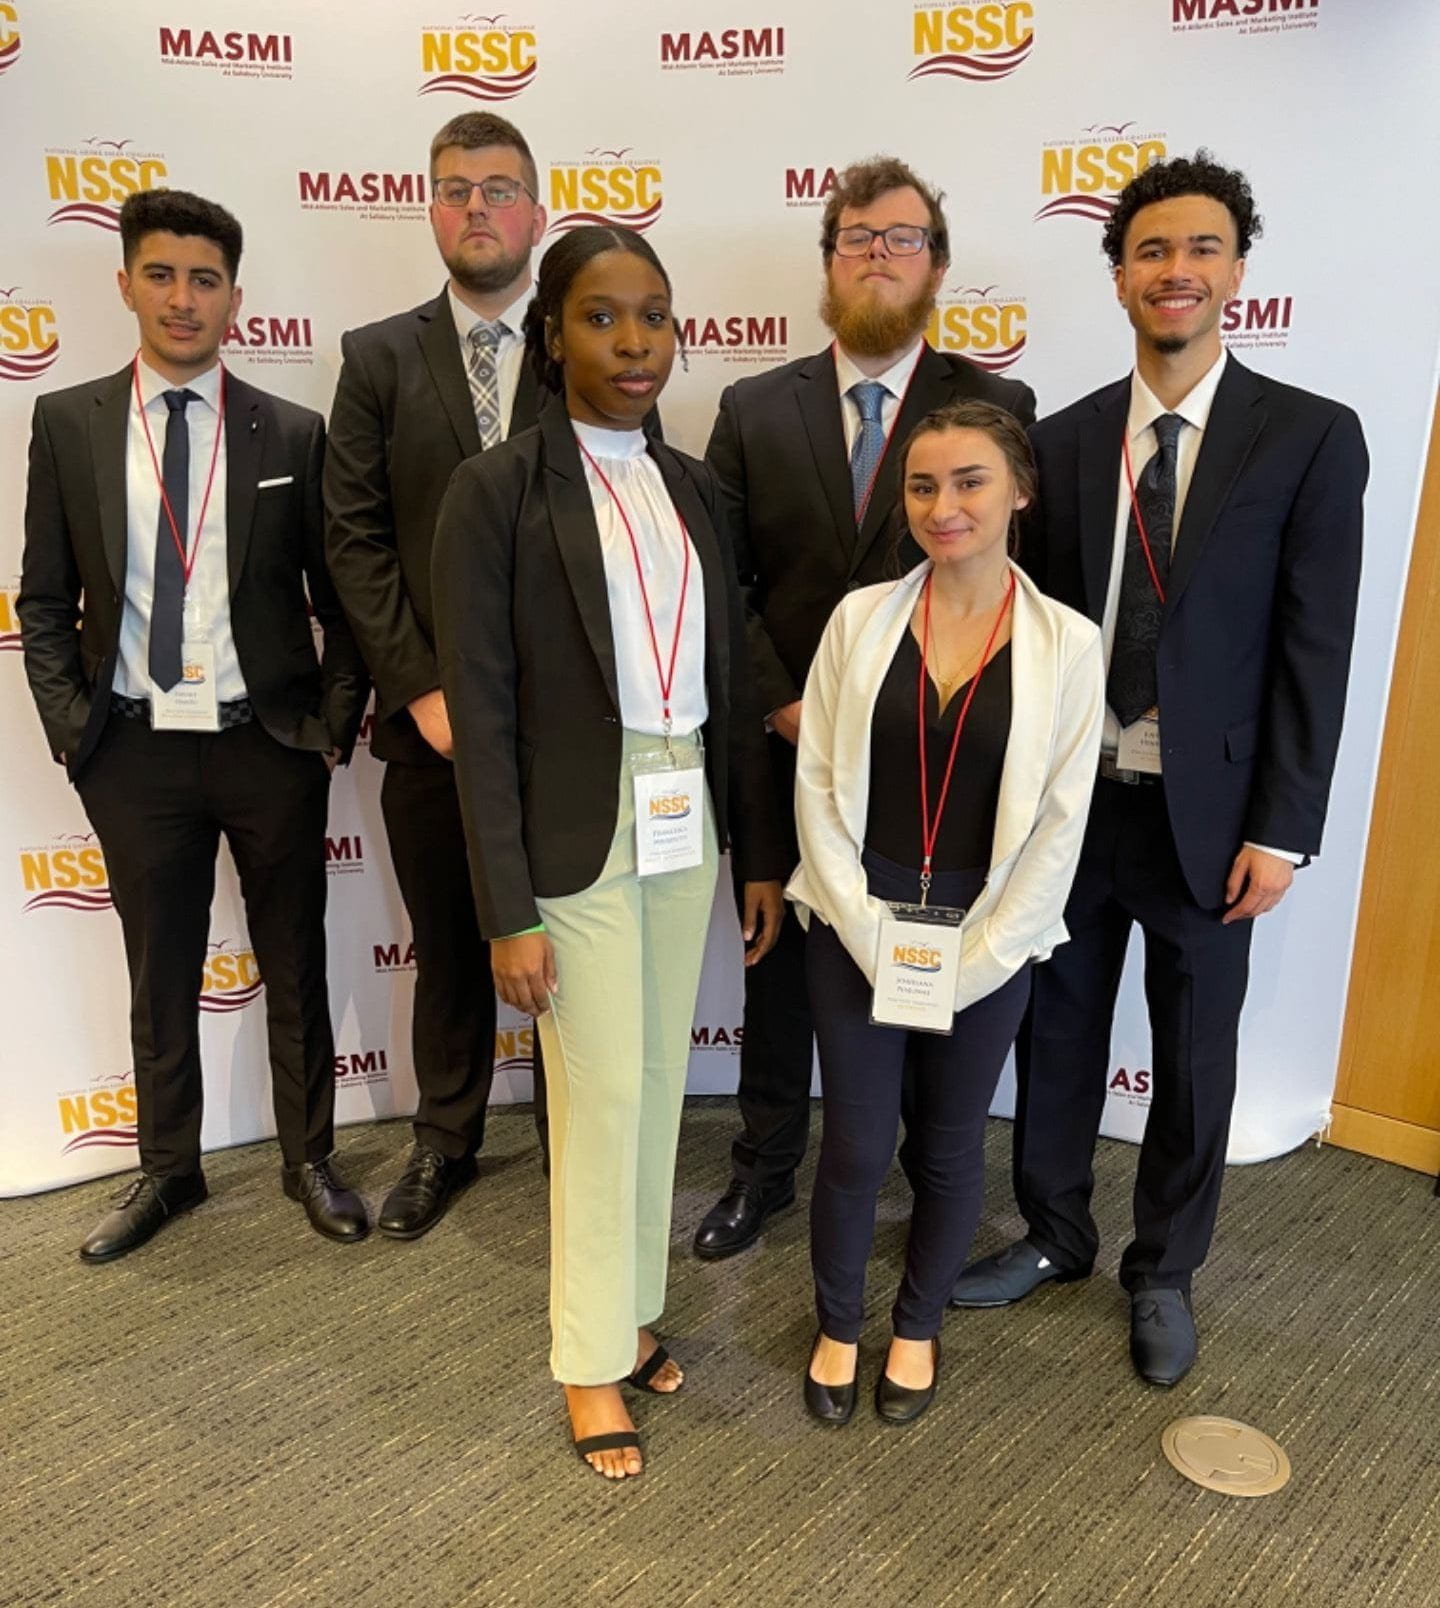 A picture of our Competitors for this competition. Yousef Hammond, Brody Arnick, Francesca Mbibouth, Kolby Allen, Joahlana Najunas, and Justin Henson.